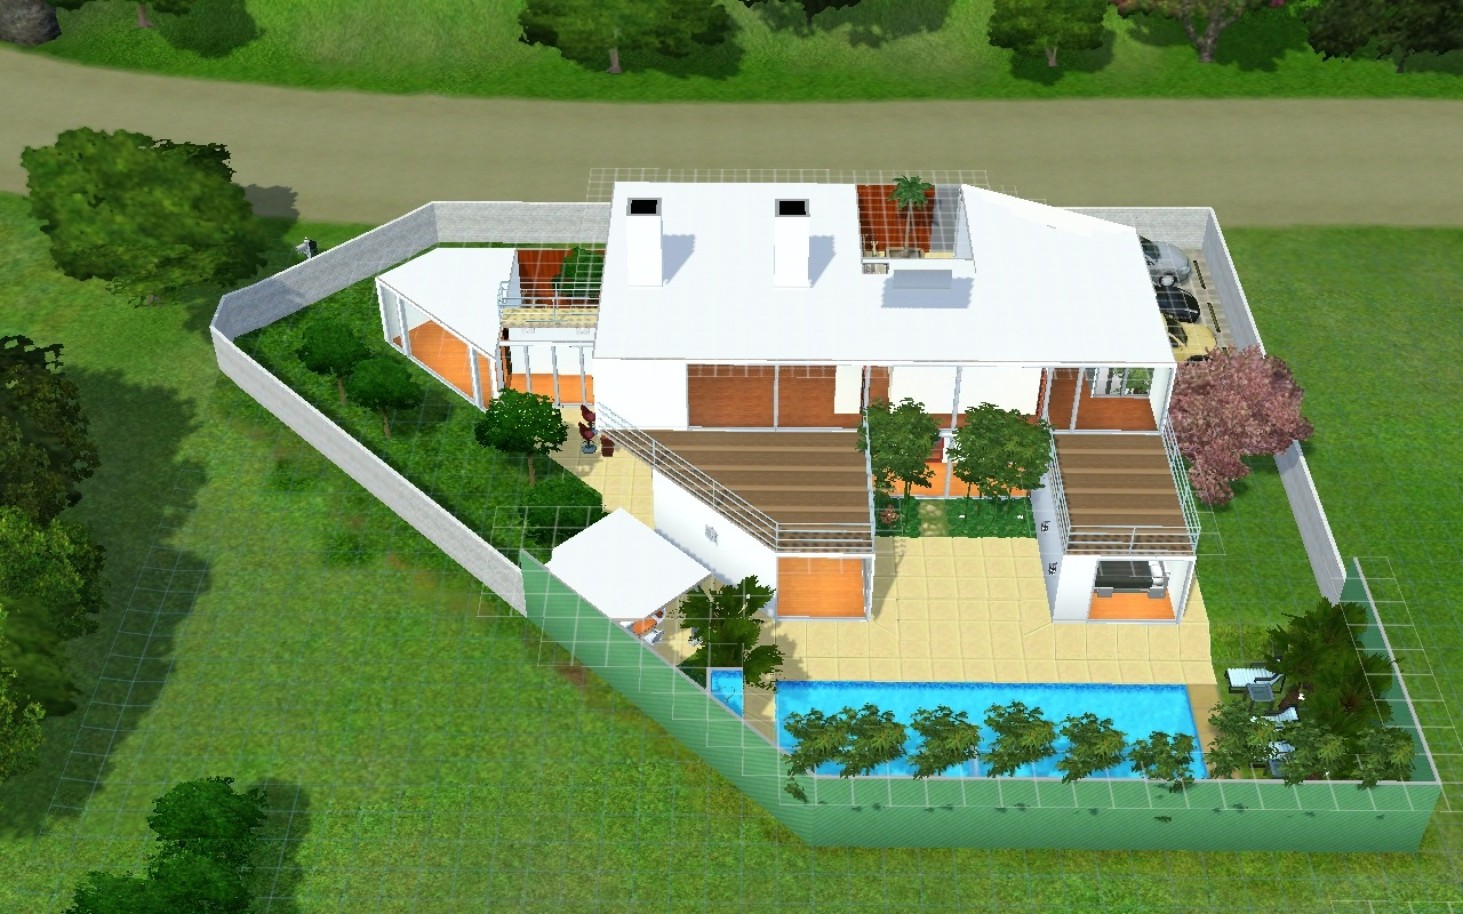 3 bedroom villa with pool and sea view, for sale in Guia, Algarve_244917